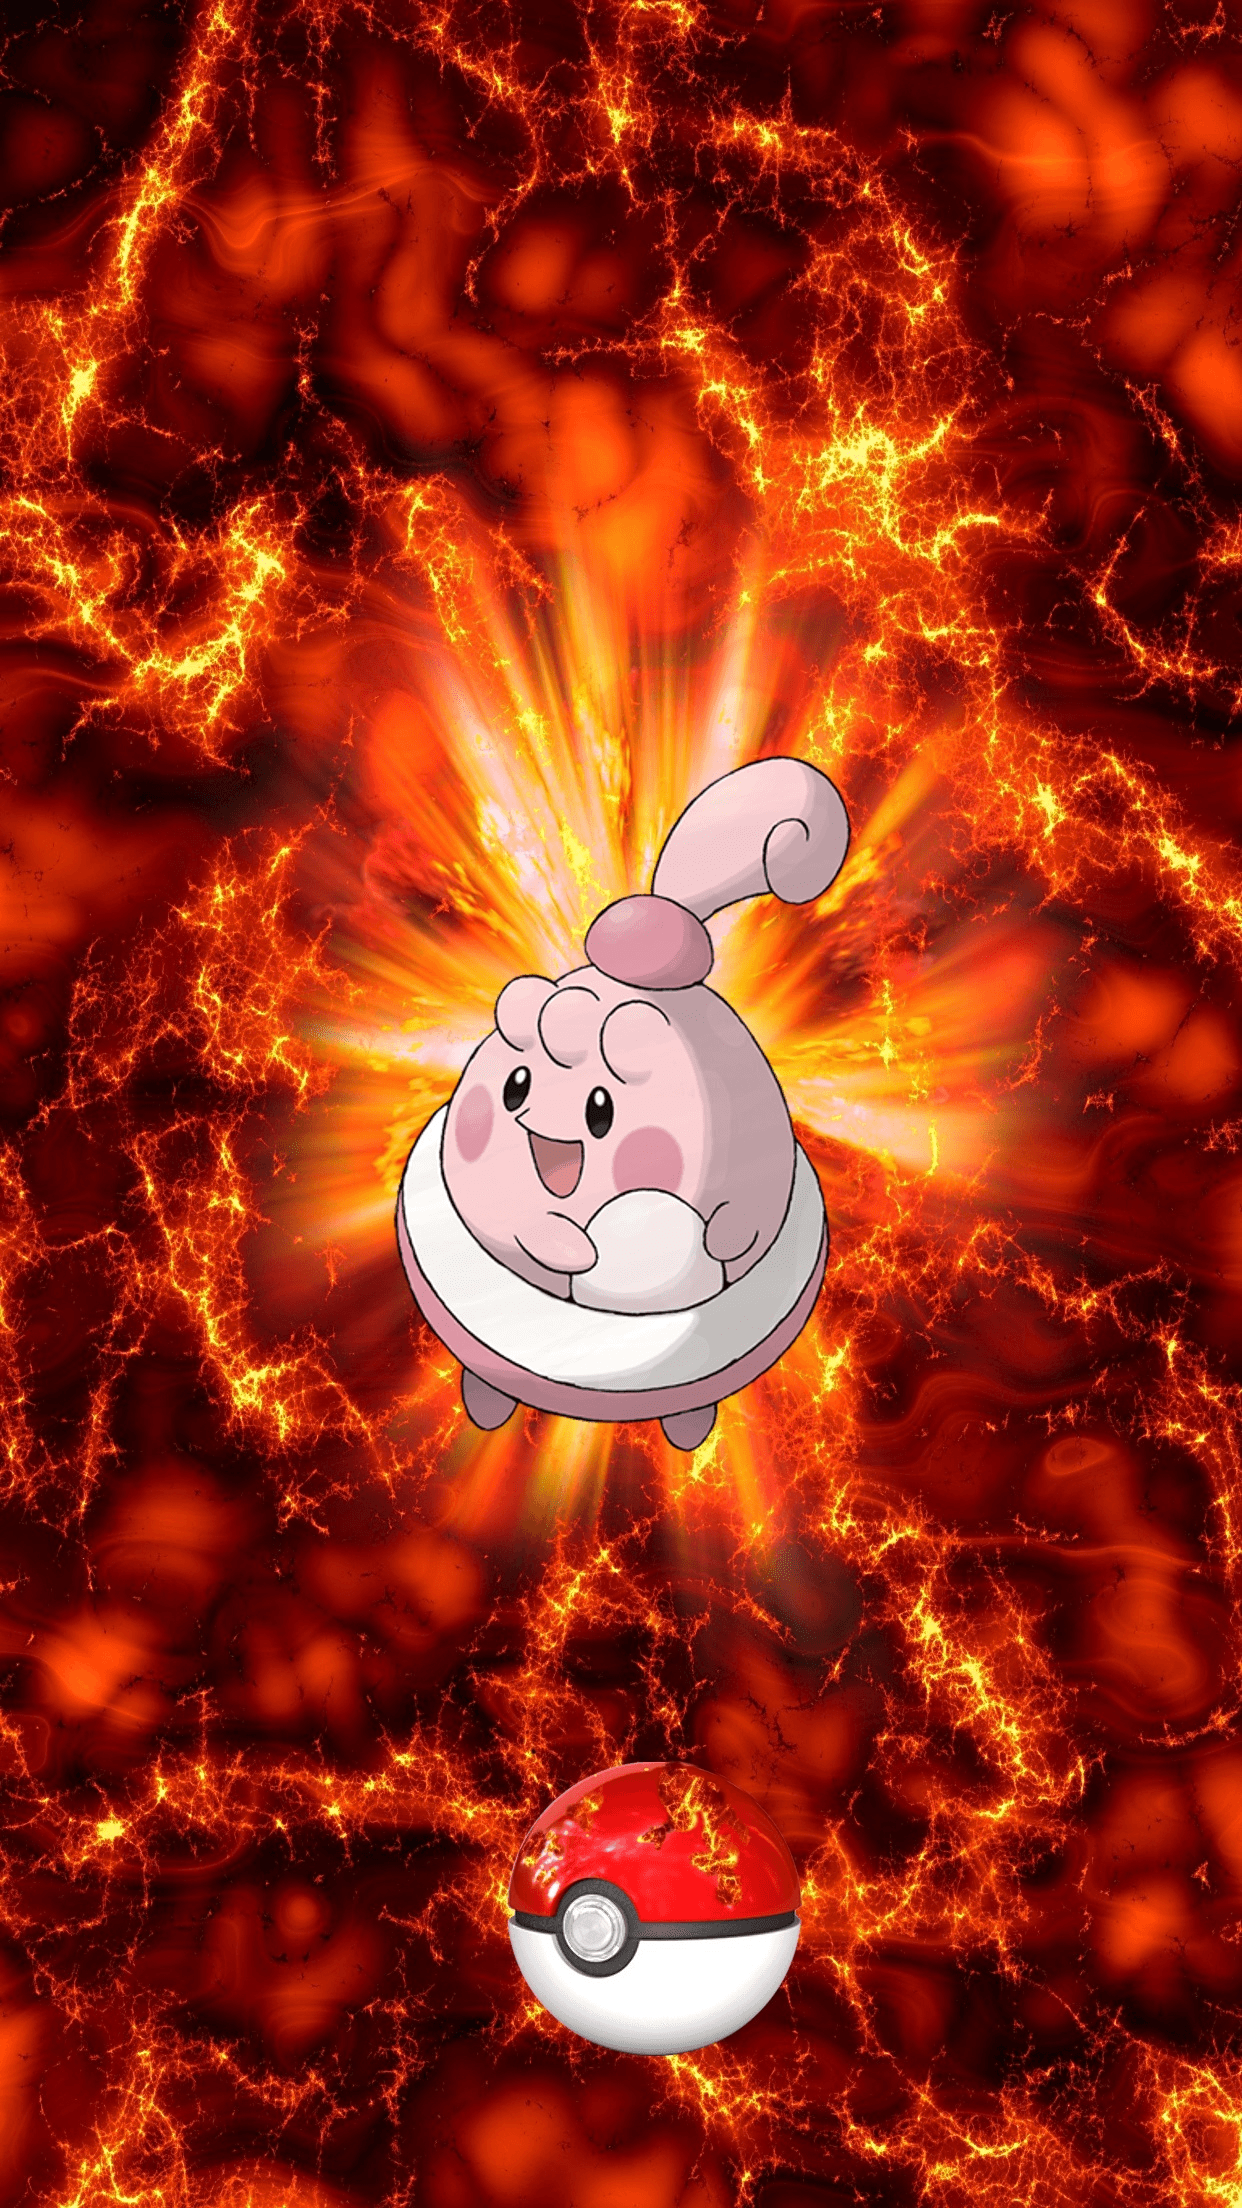 Fire Pokeball Happiny p Pinpuku Egg from Chansey holding luck